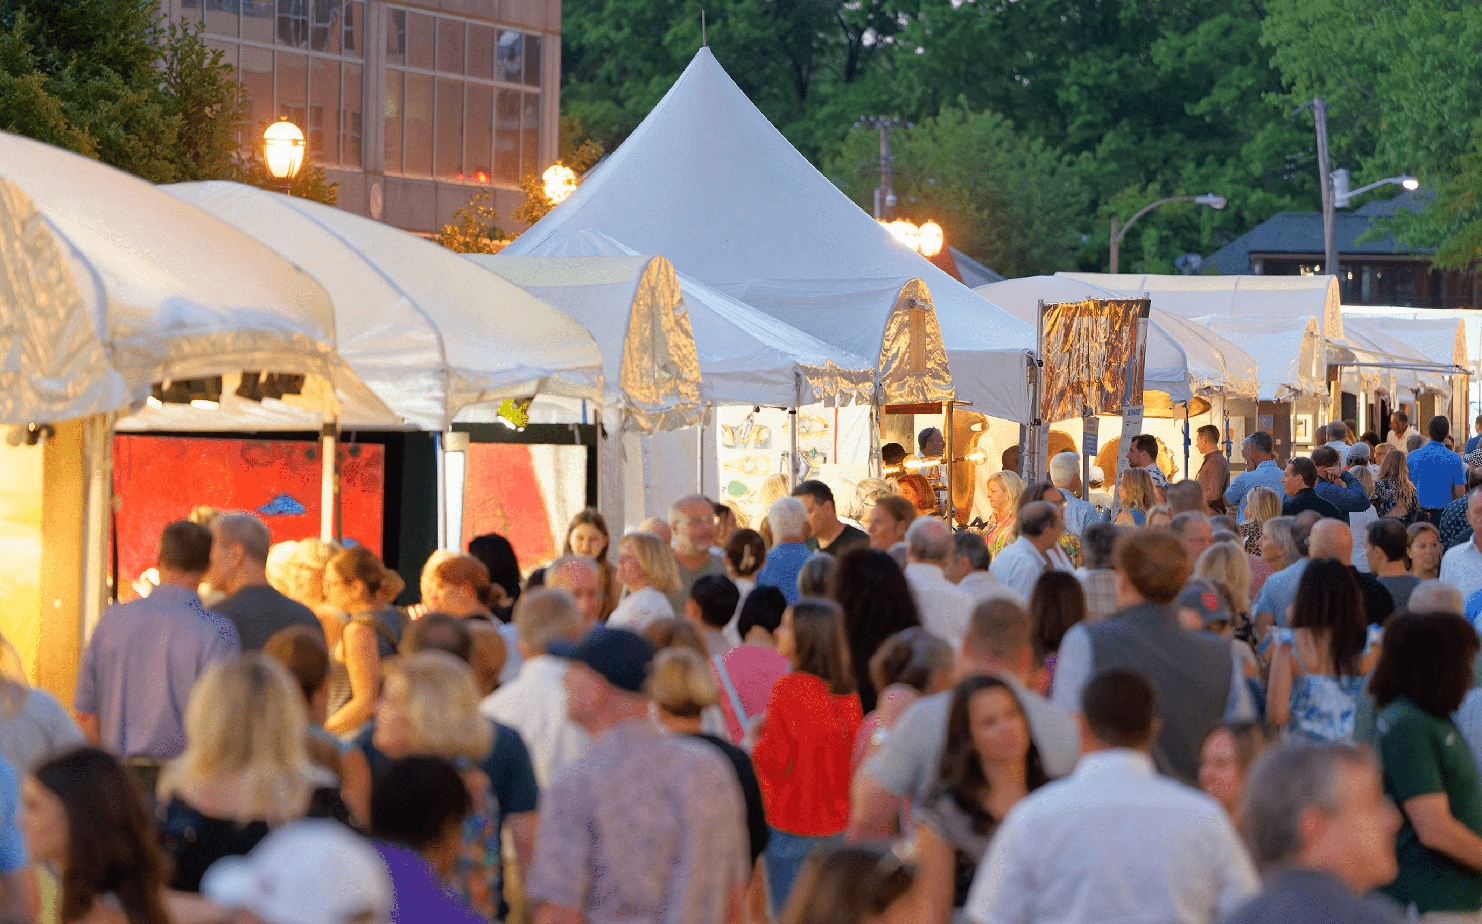 See you in 2024 for the 31st Saint Louis Art Fair!